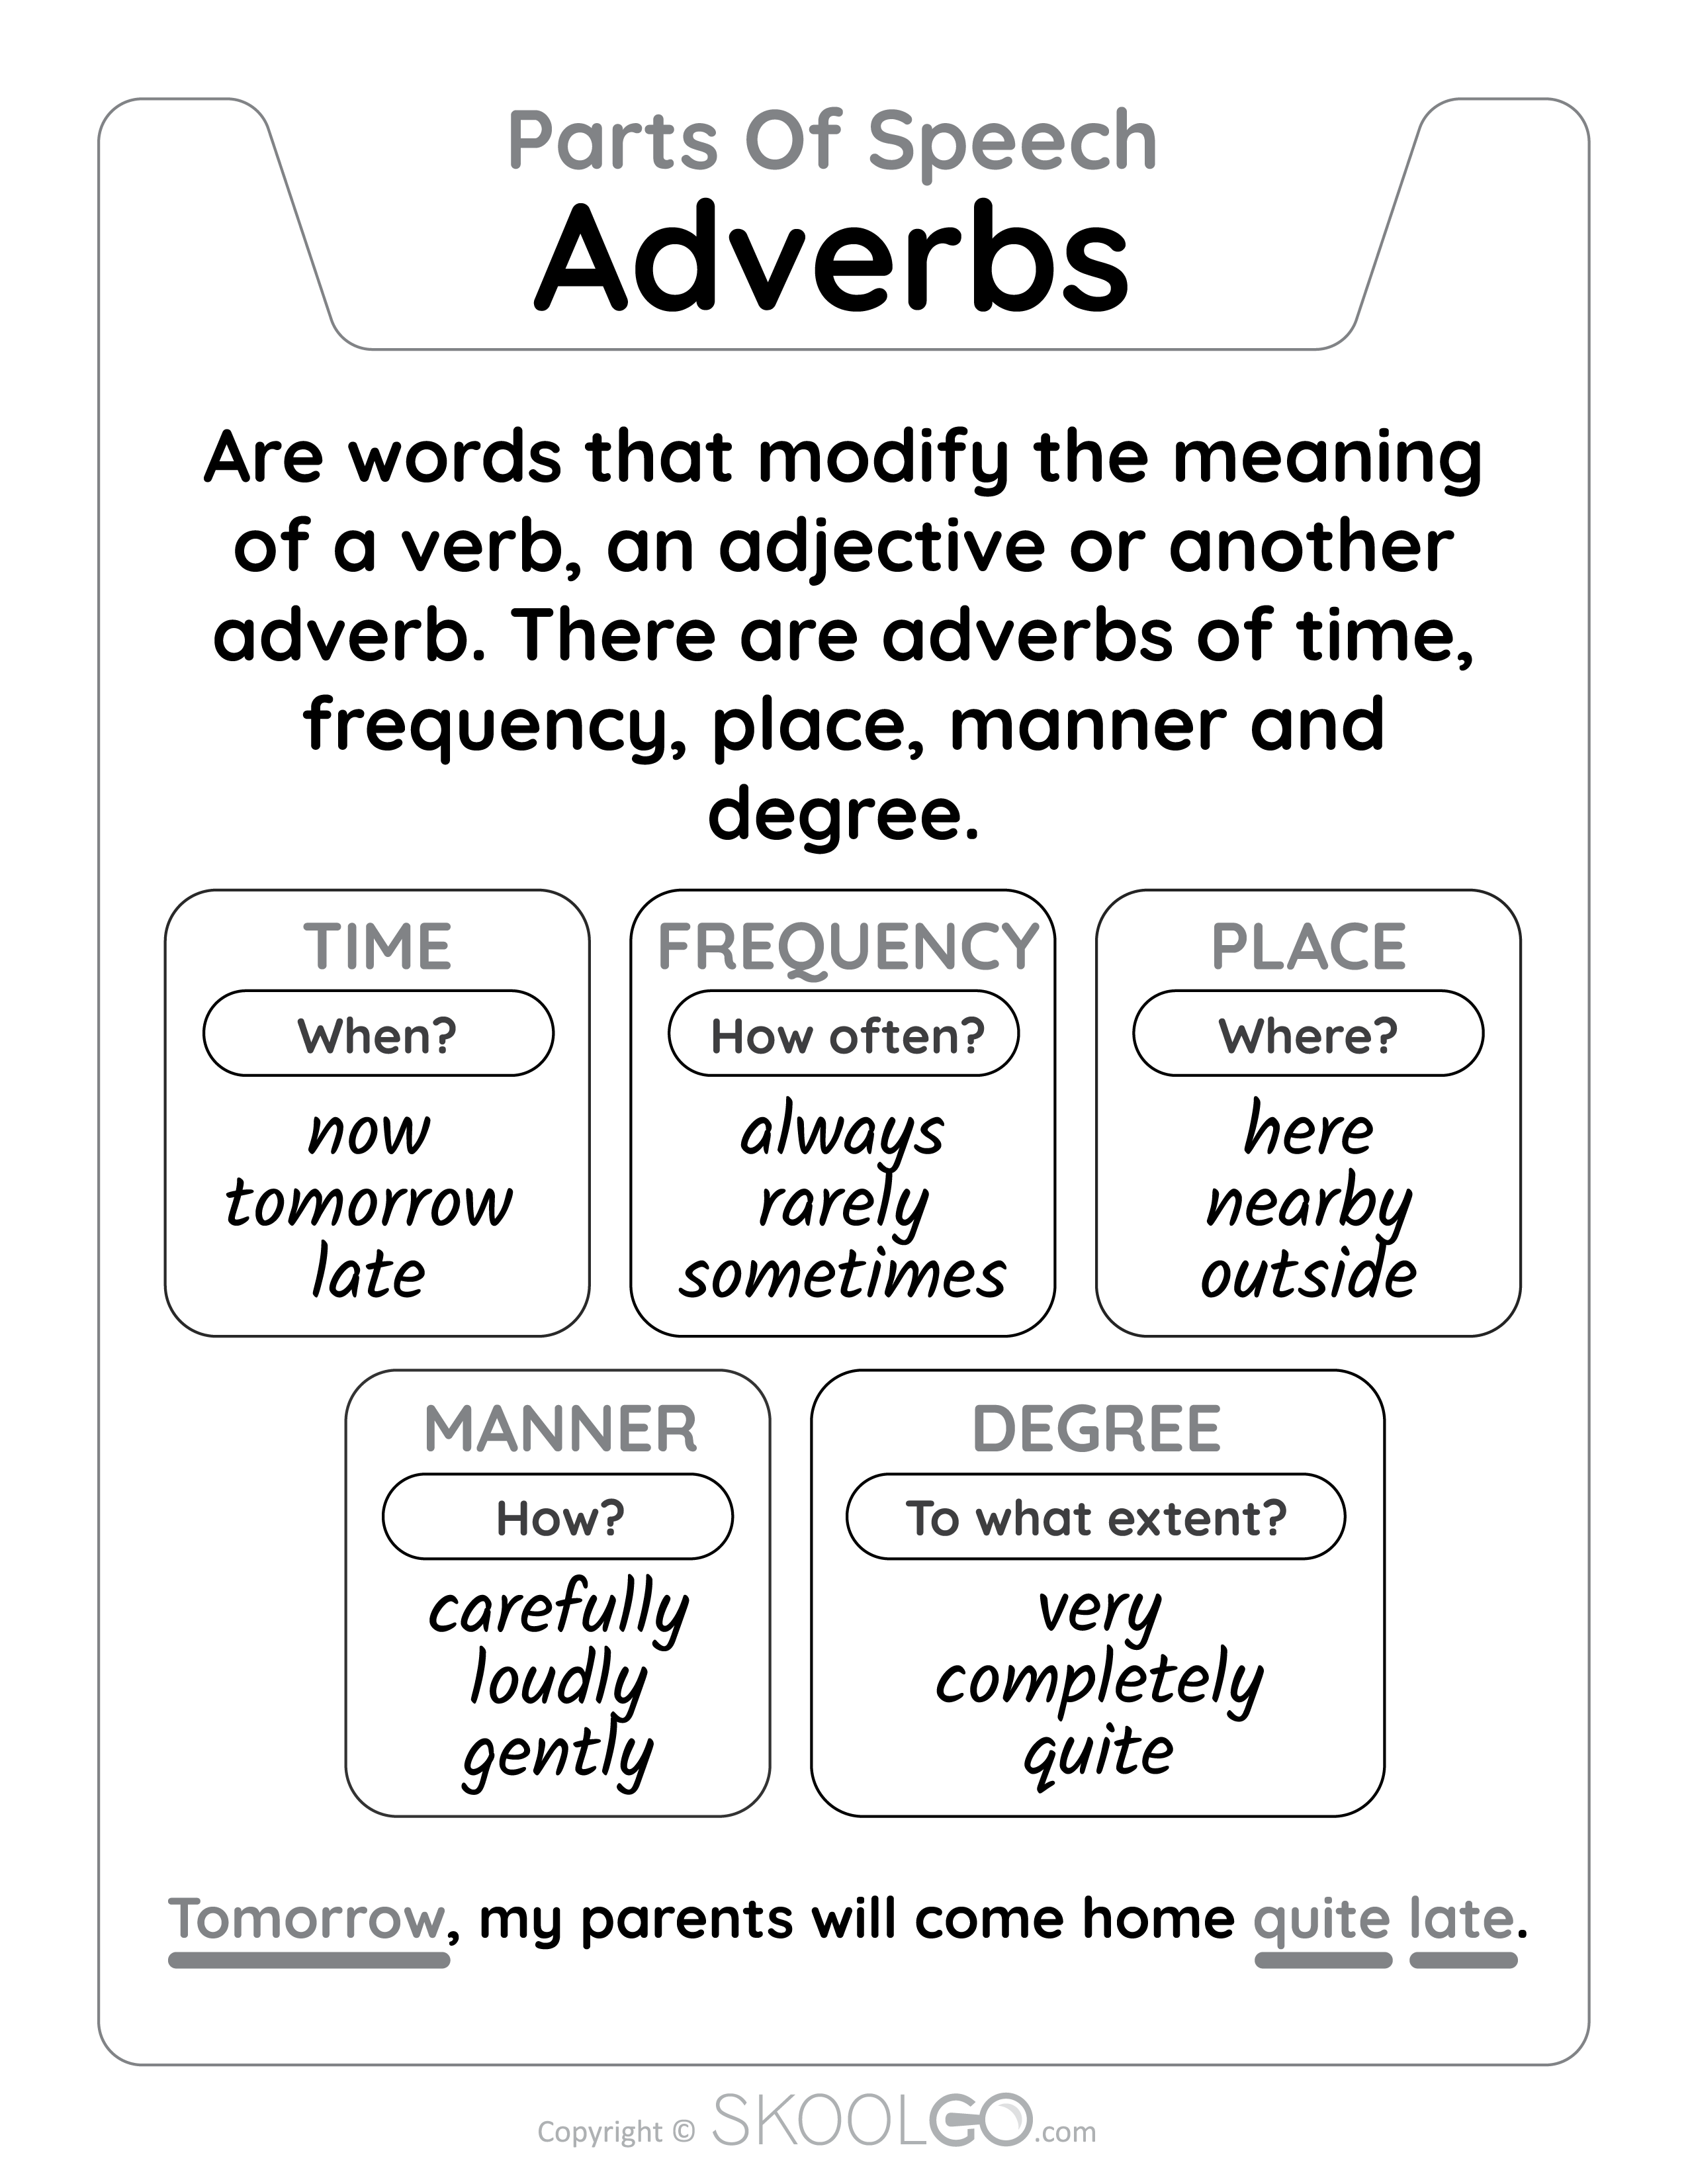 Adverbs - Parts Of Speech - Free Learning Classroom Poster